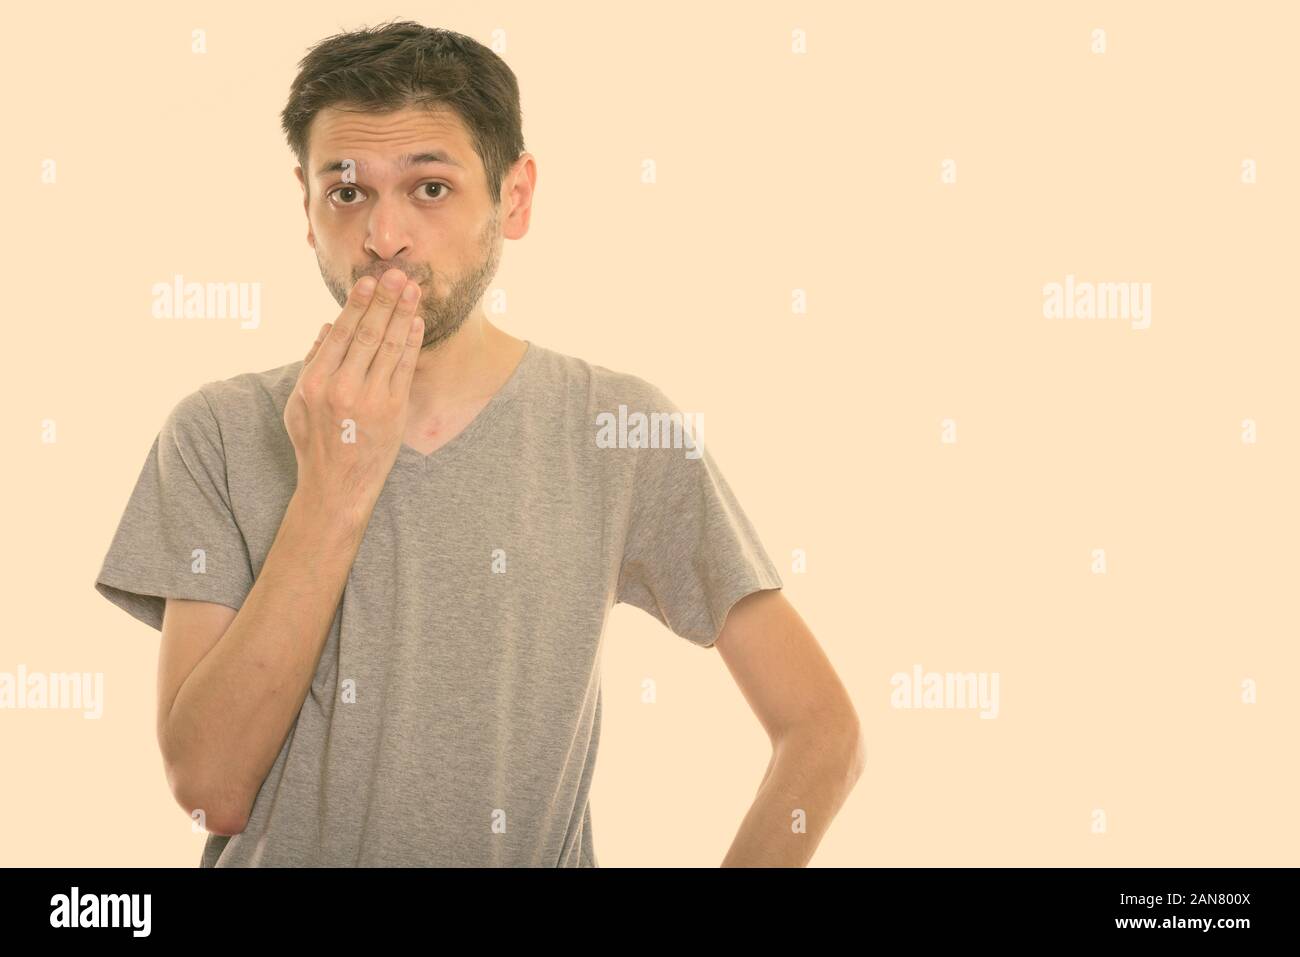 Studio shot of young man looking shocked while covering mouth Stock Photo